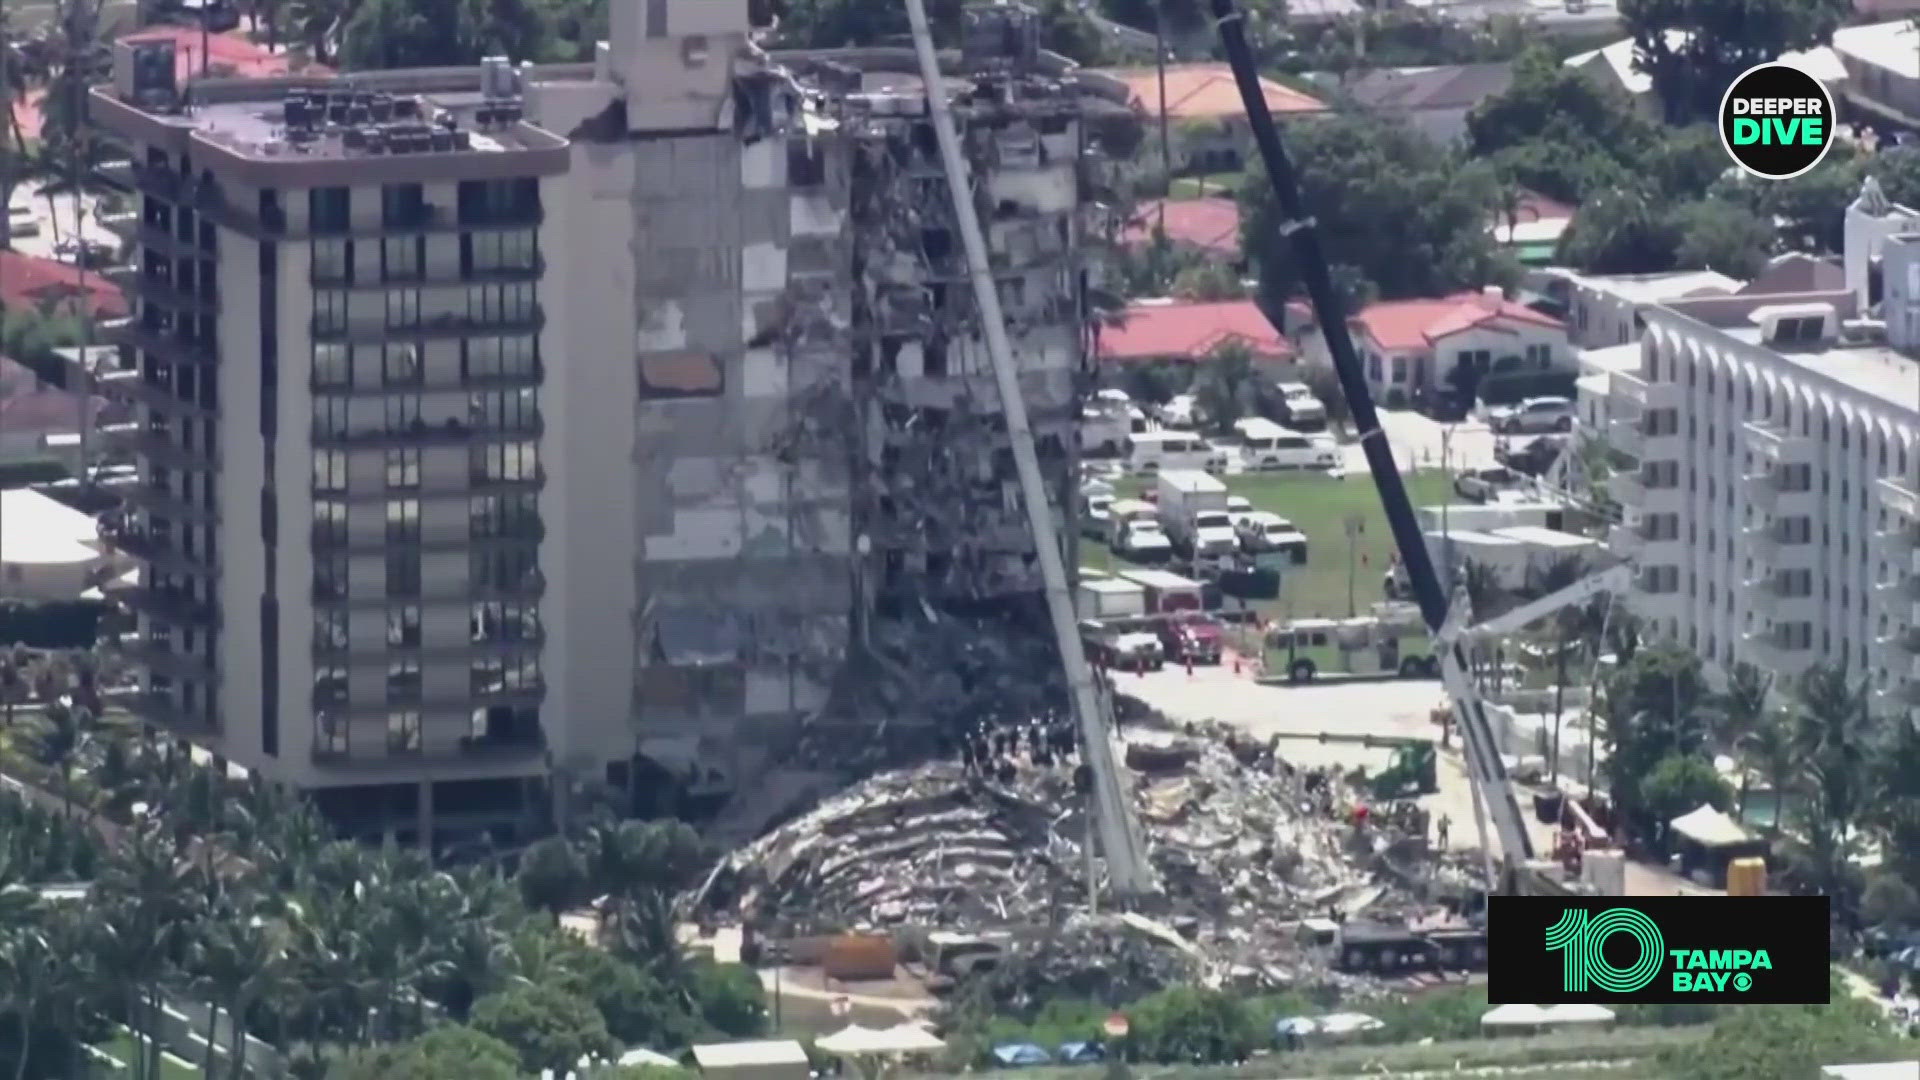 We took a look at a Sarasota condo tower that was in danger of collapsing 10 years before the Surfside tragedy.